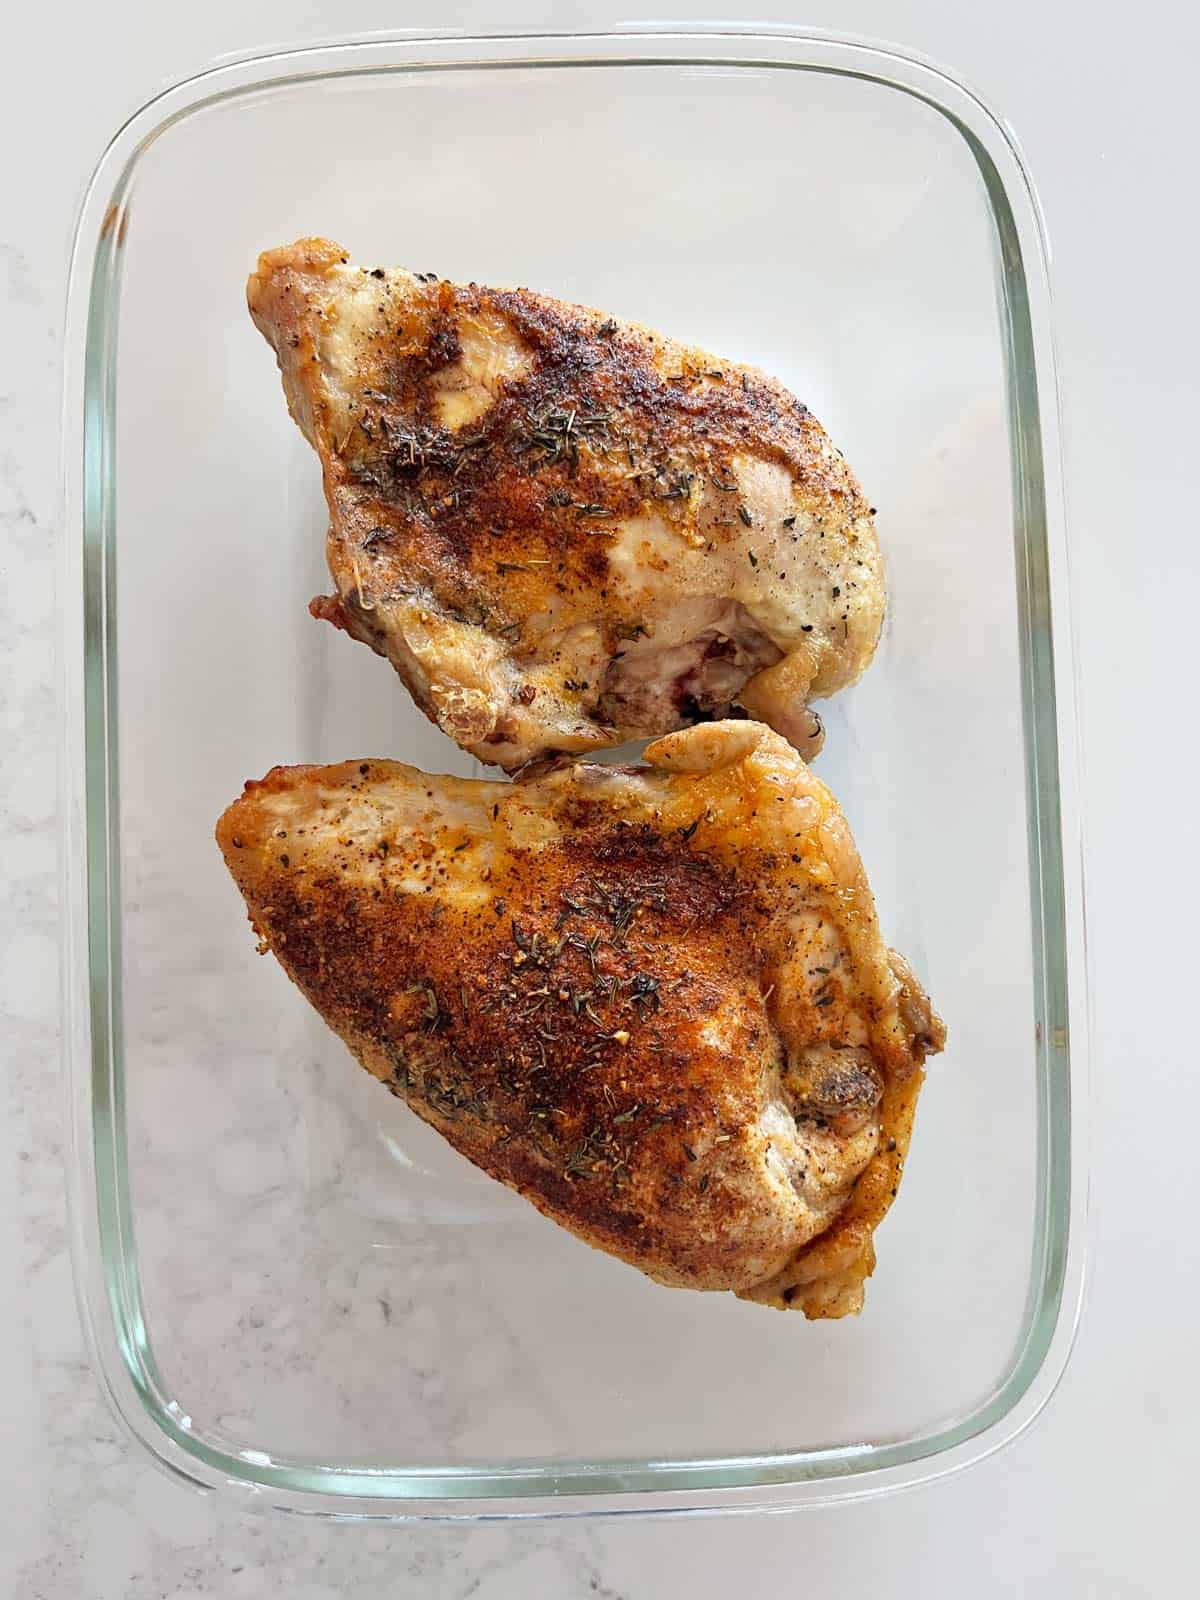 Two skin-on, bone-in chicken breasts are stored in a glass food storage containers.